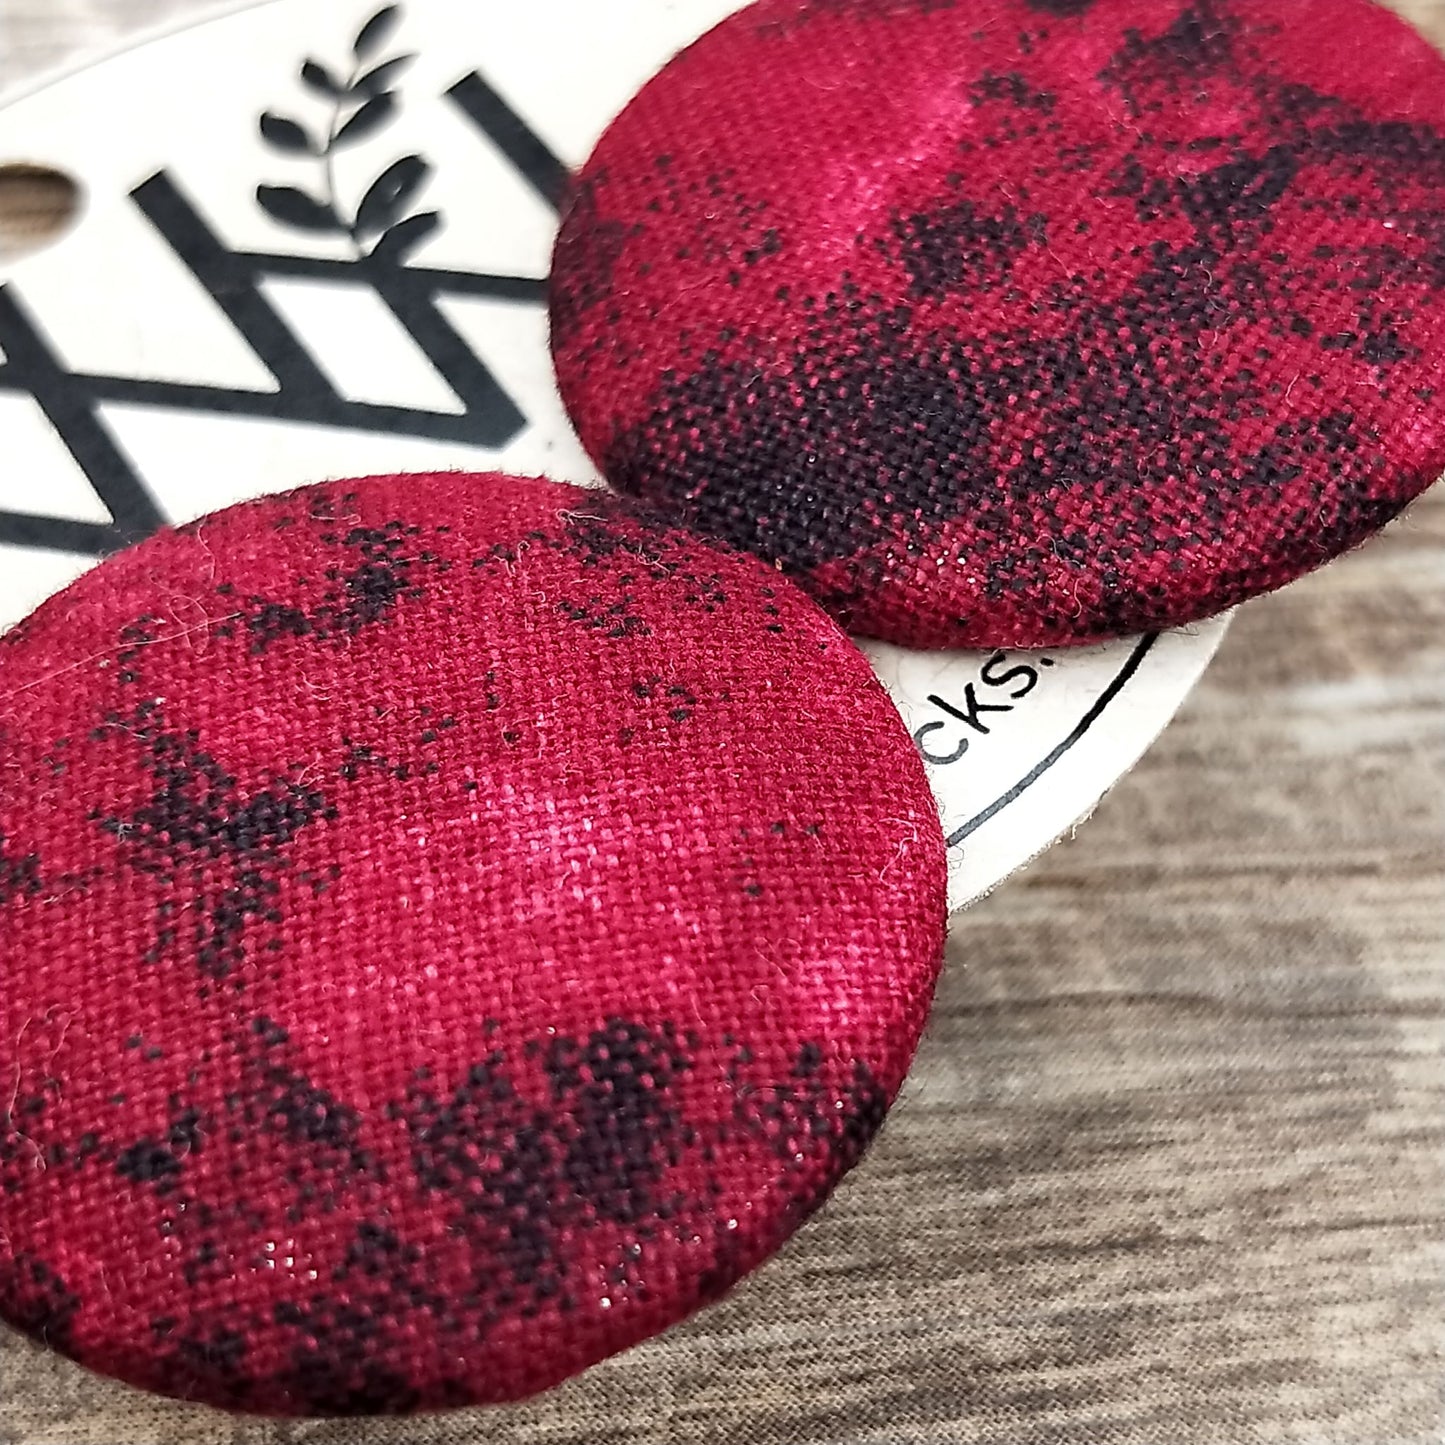 Wildears Fabric Covered Button Earrings Blood Moon 27mm